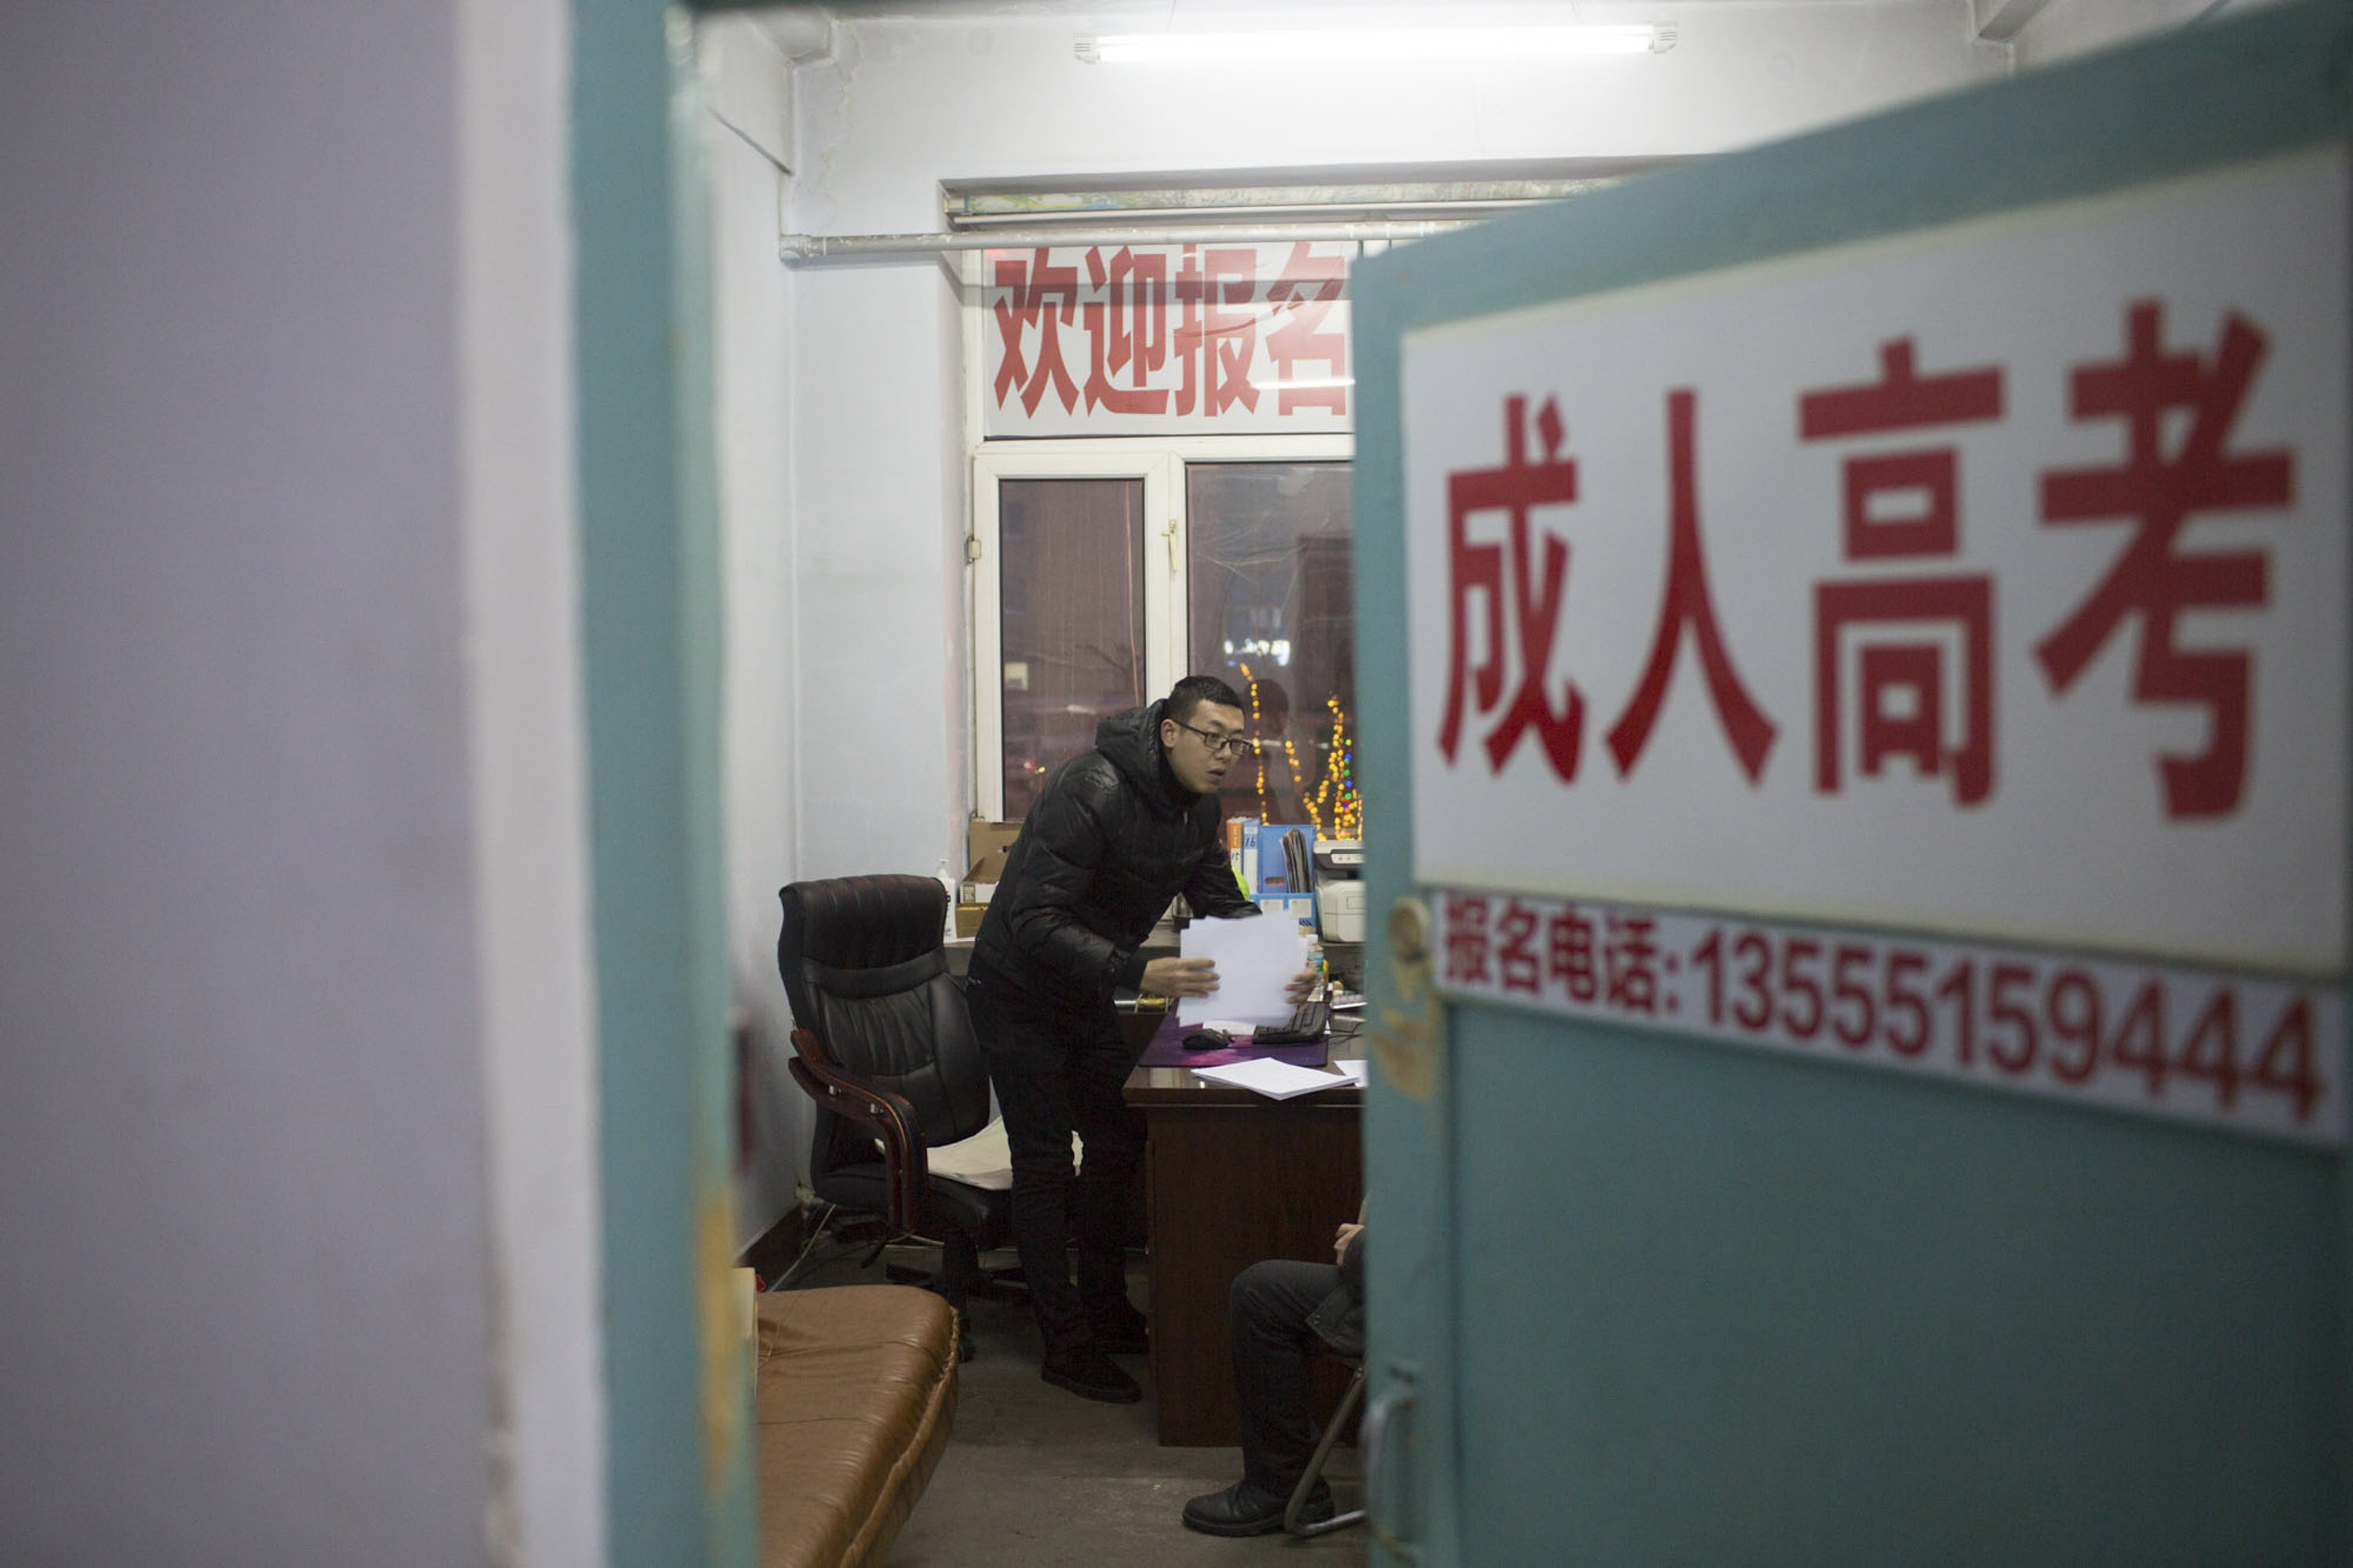 Yang Kun is visited by a client at his adult education recruitment practice in Shuangyashan, Jan. 20, 2016. Yang started the firm following a demotion at the mine where he worked previously. Zhou Pinglang/Sixth Tone